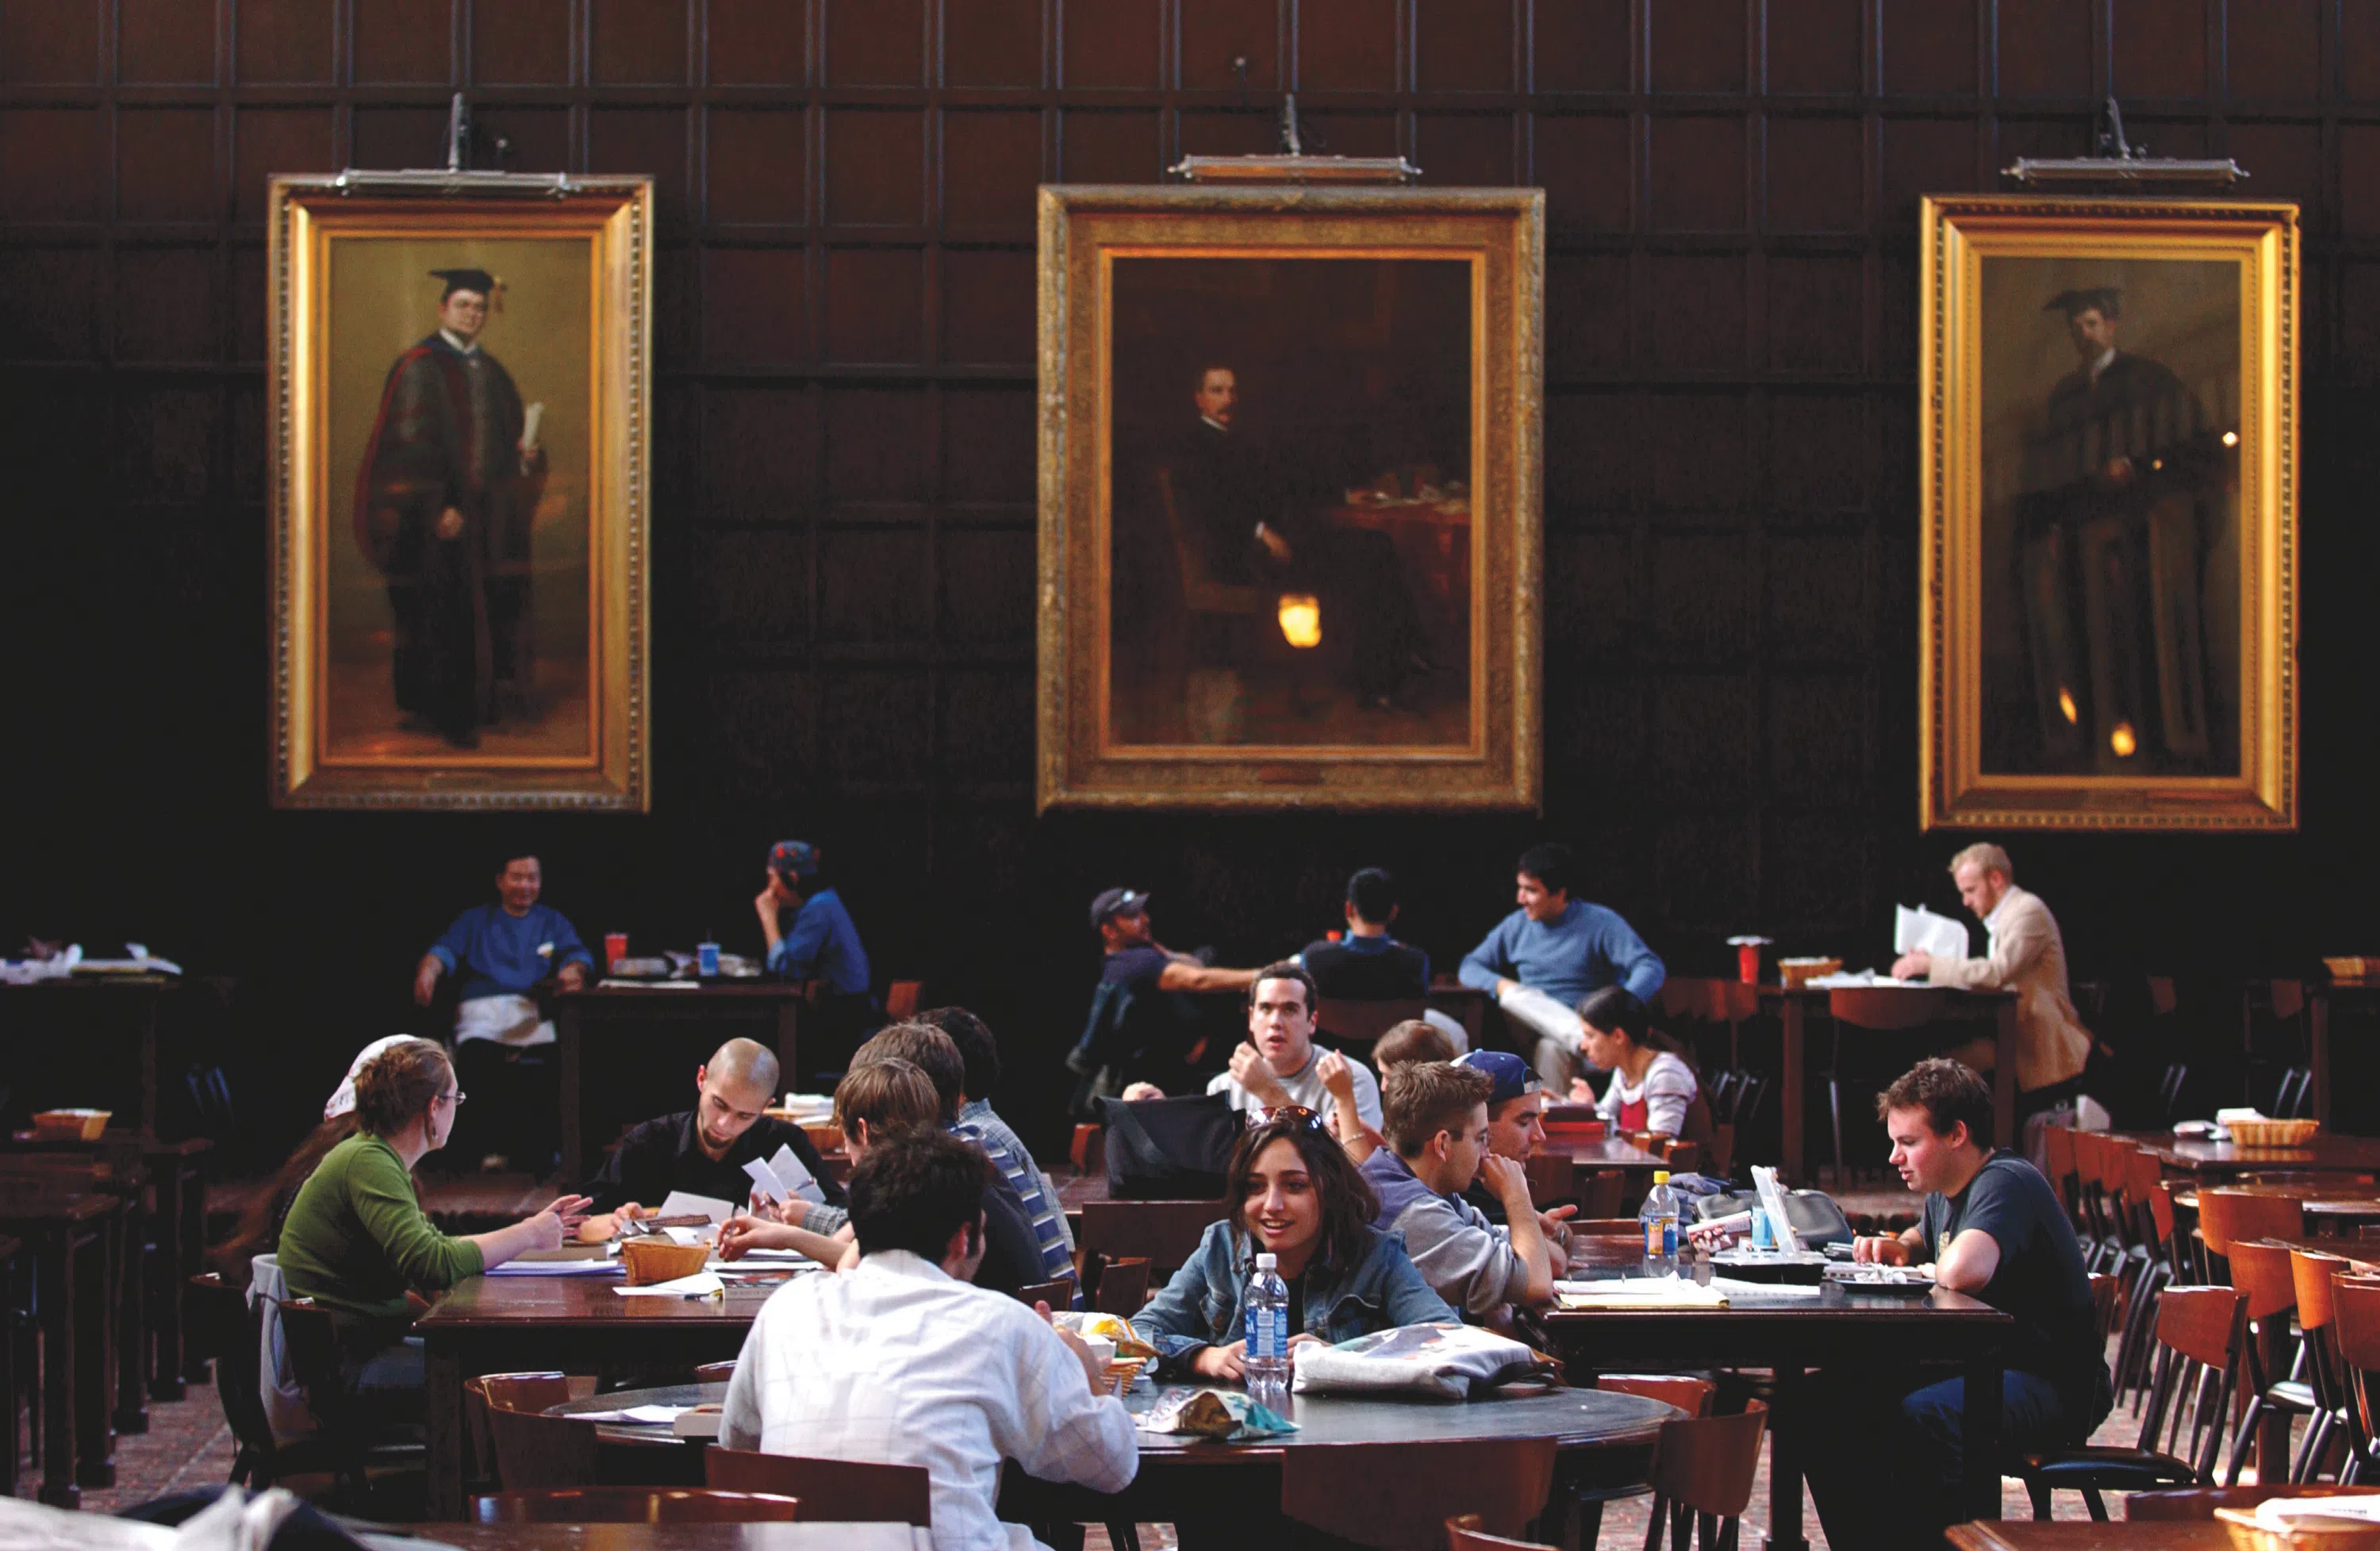 Students sit in a large room at tables eating and talking, large framed portraits hang in the background